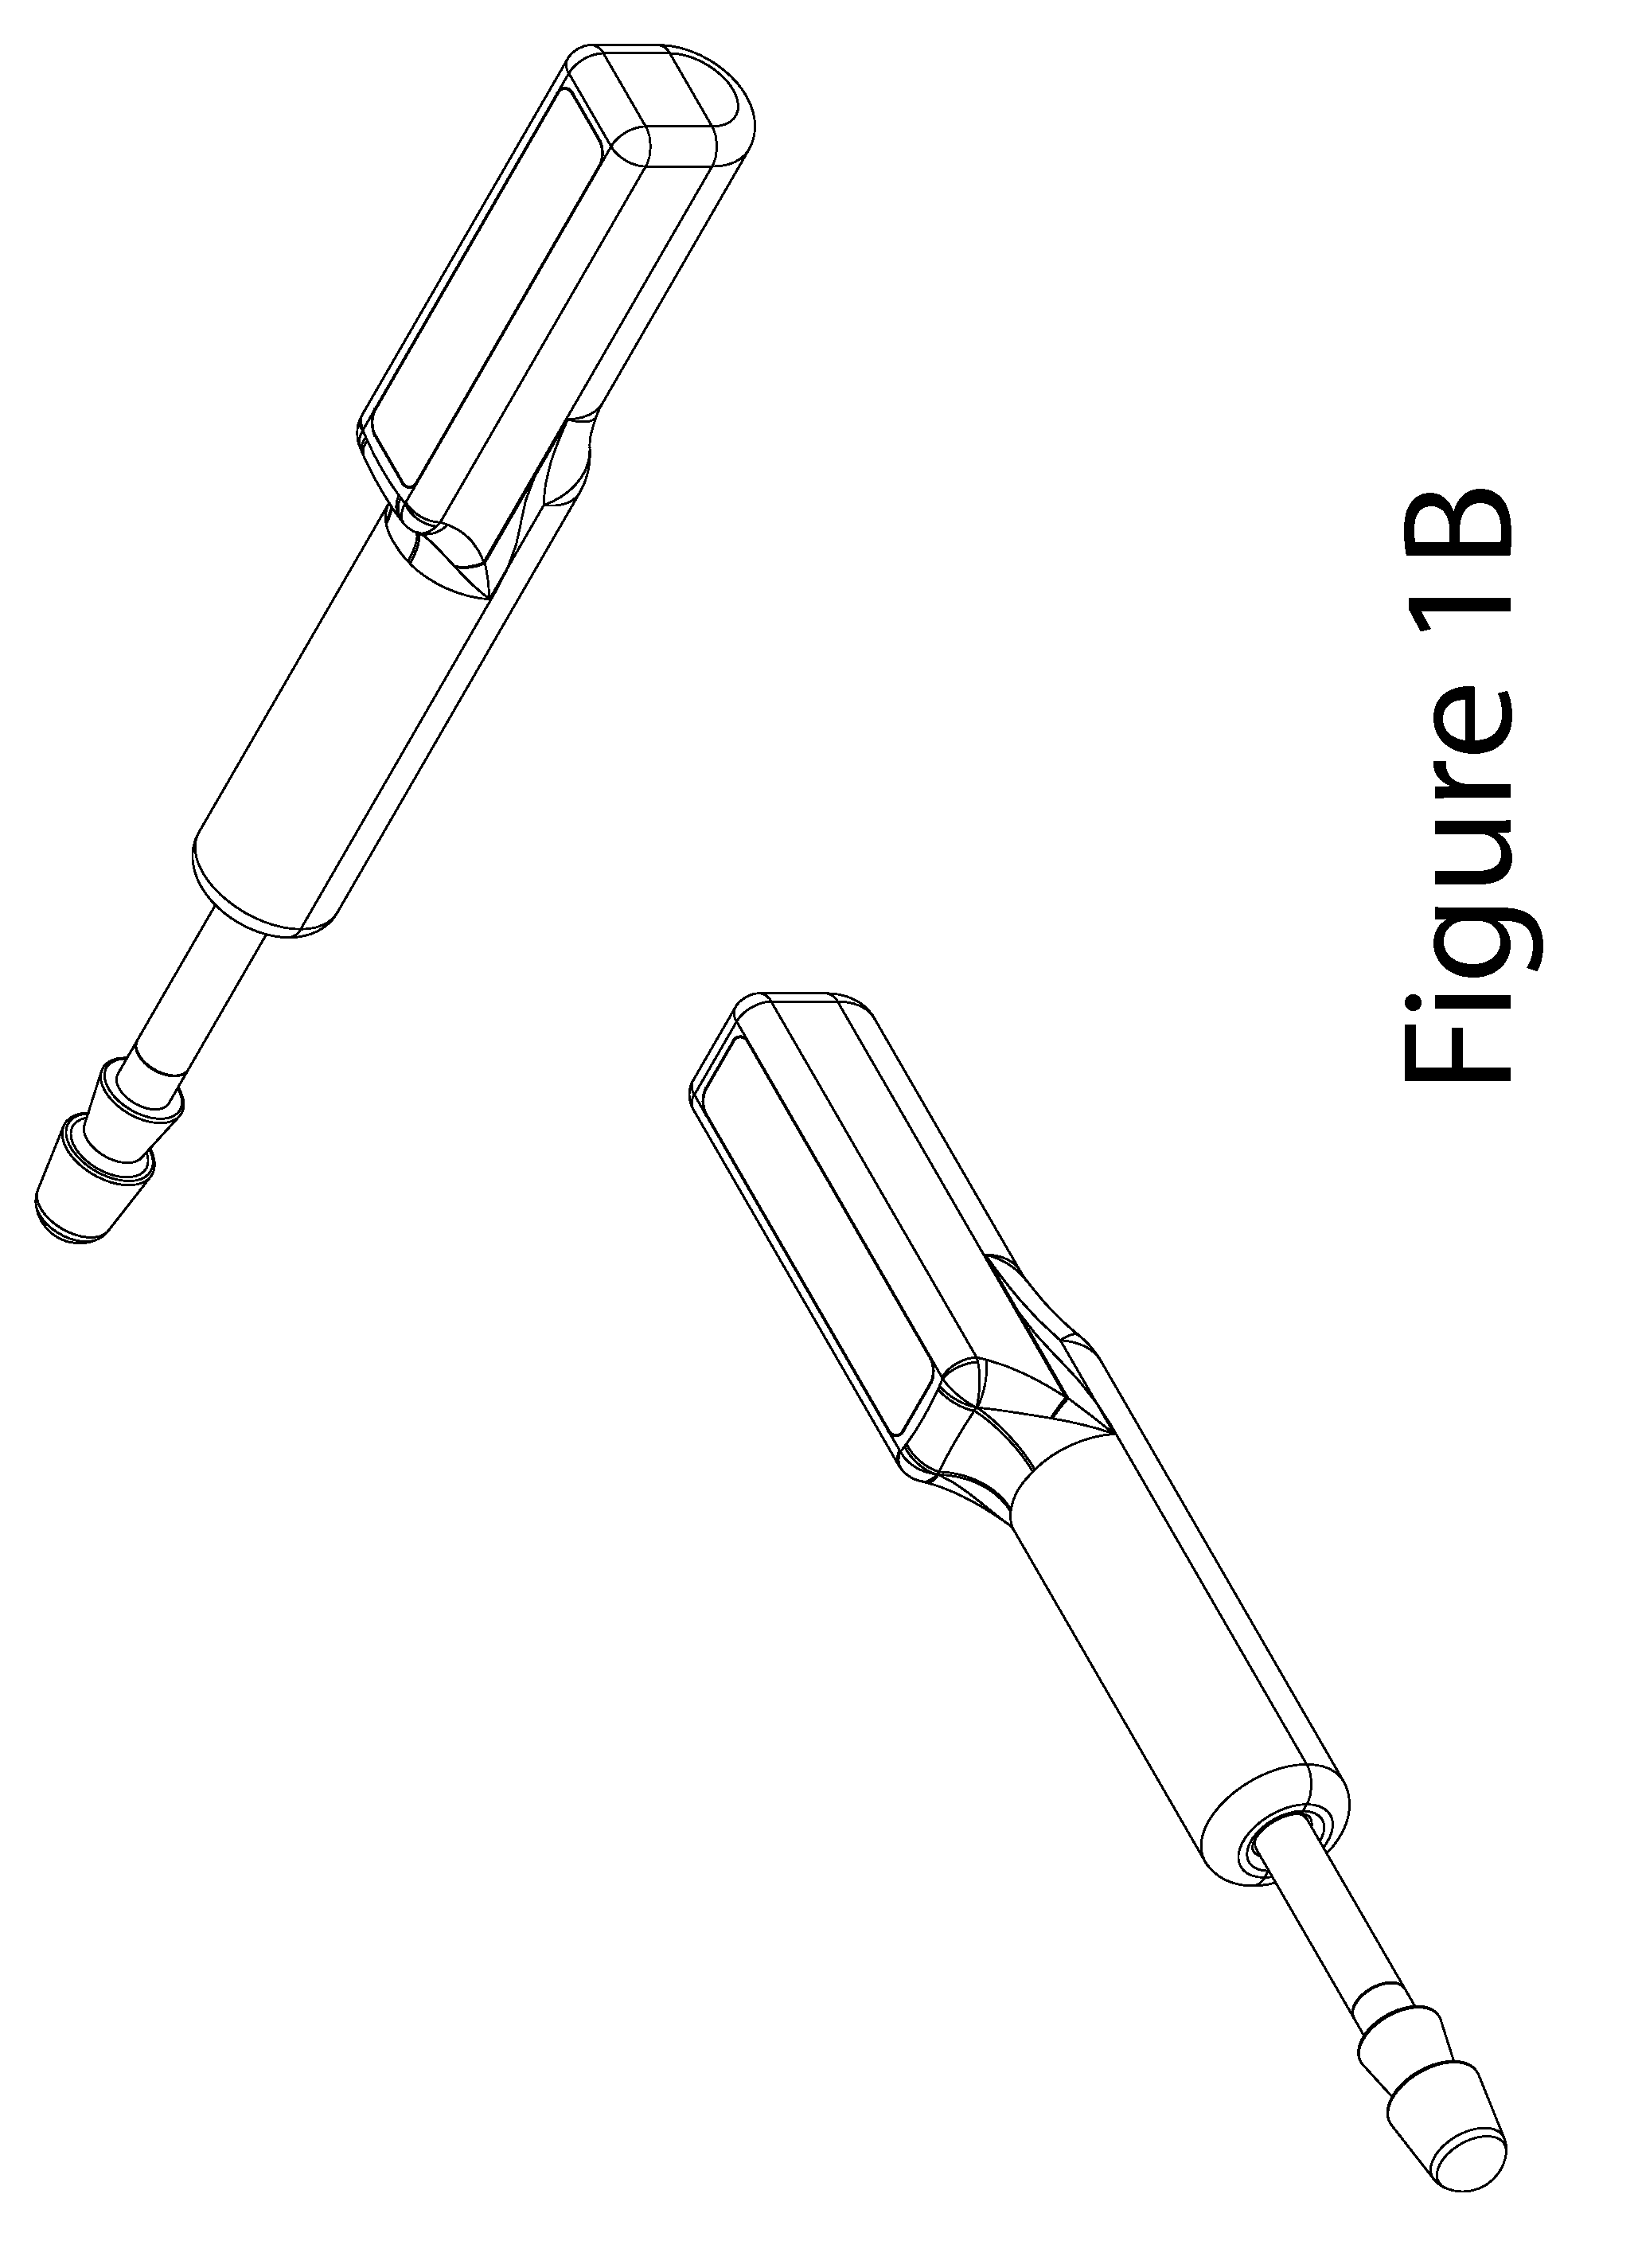 Linear Motor and Handheld Unit